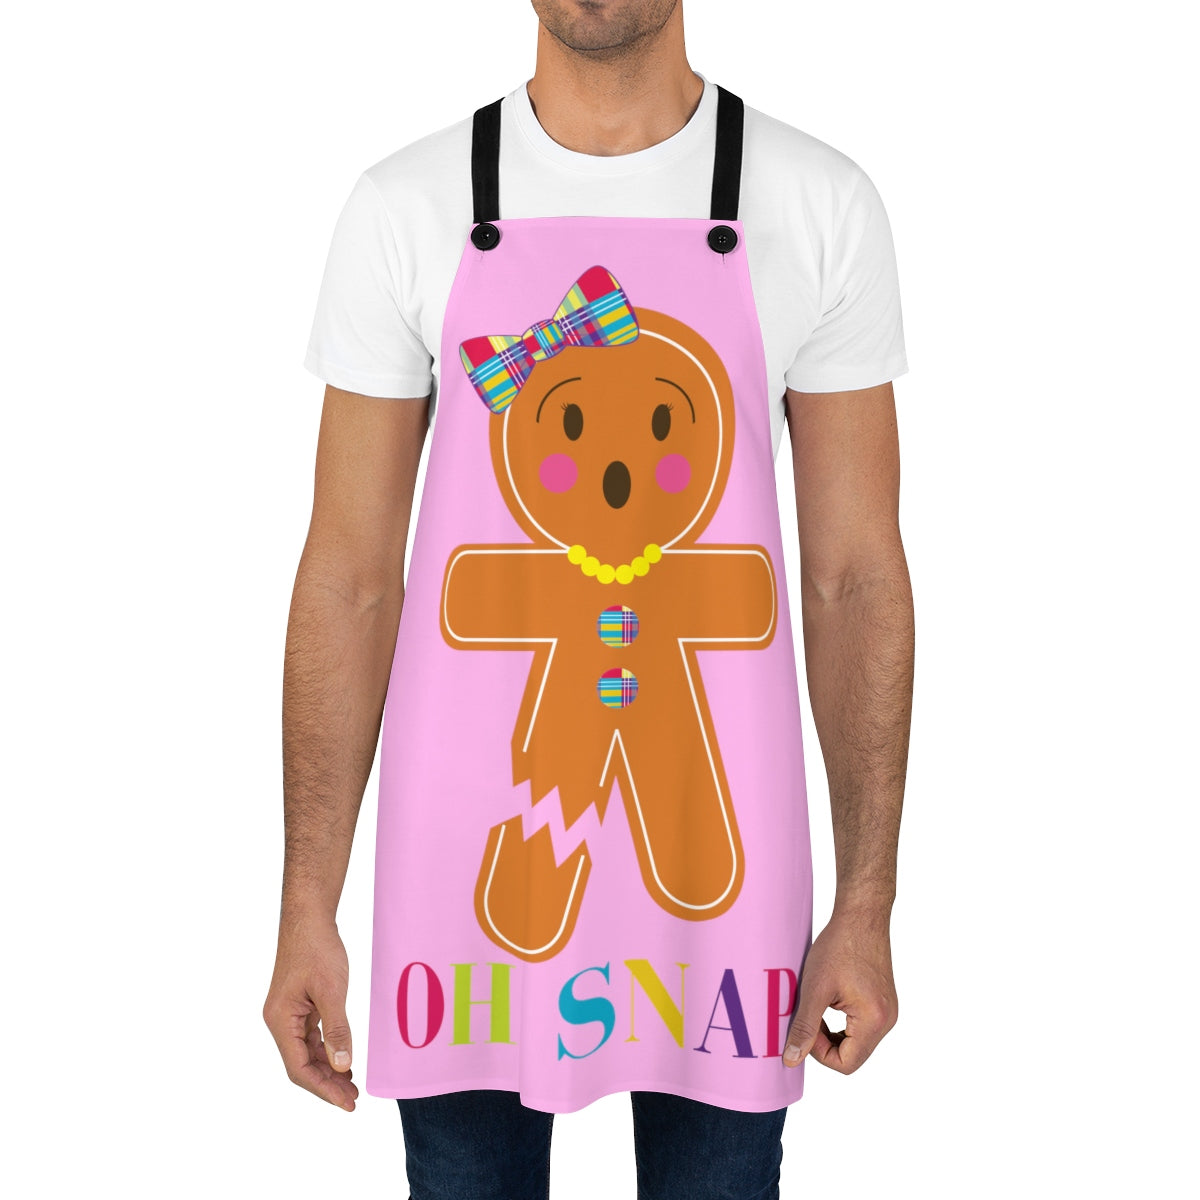 OH SNAP, MISS GINGER! Apron